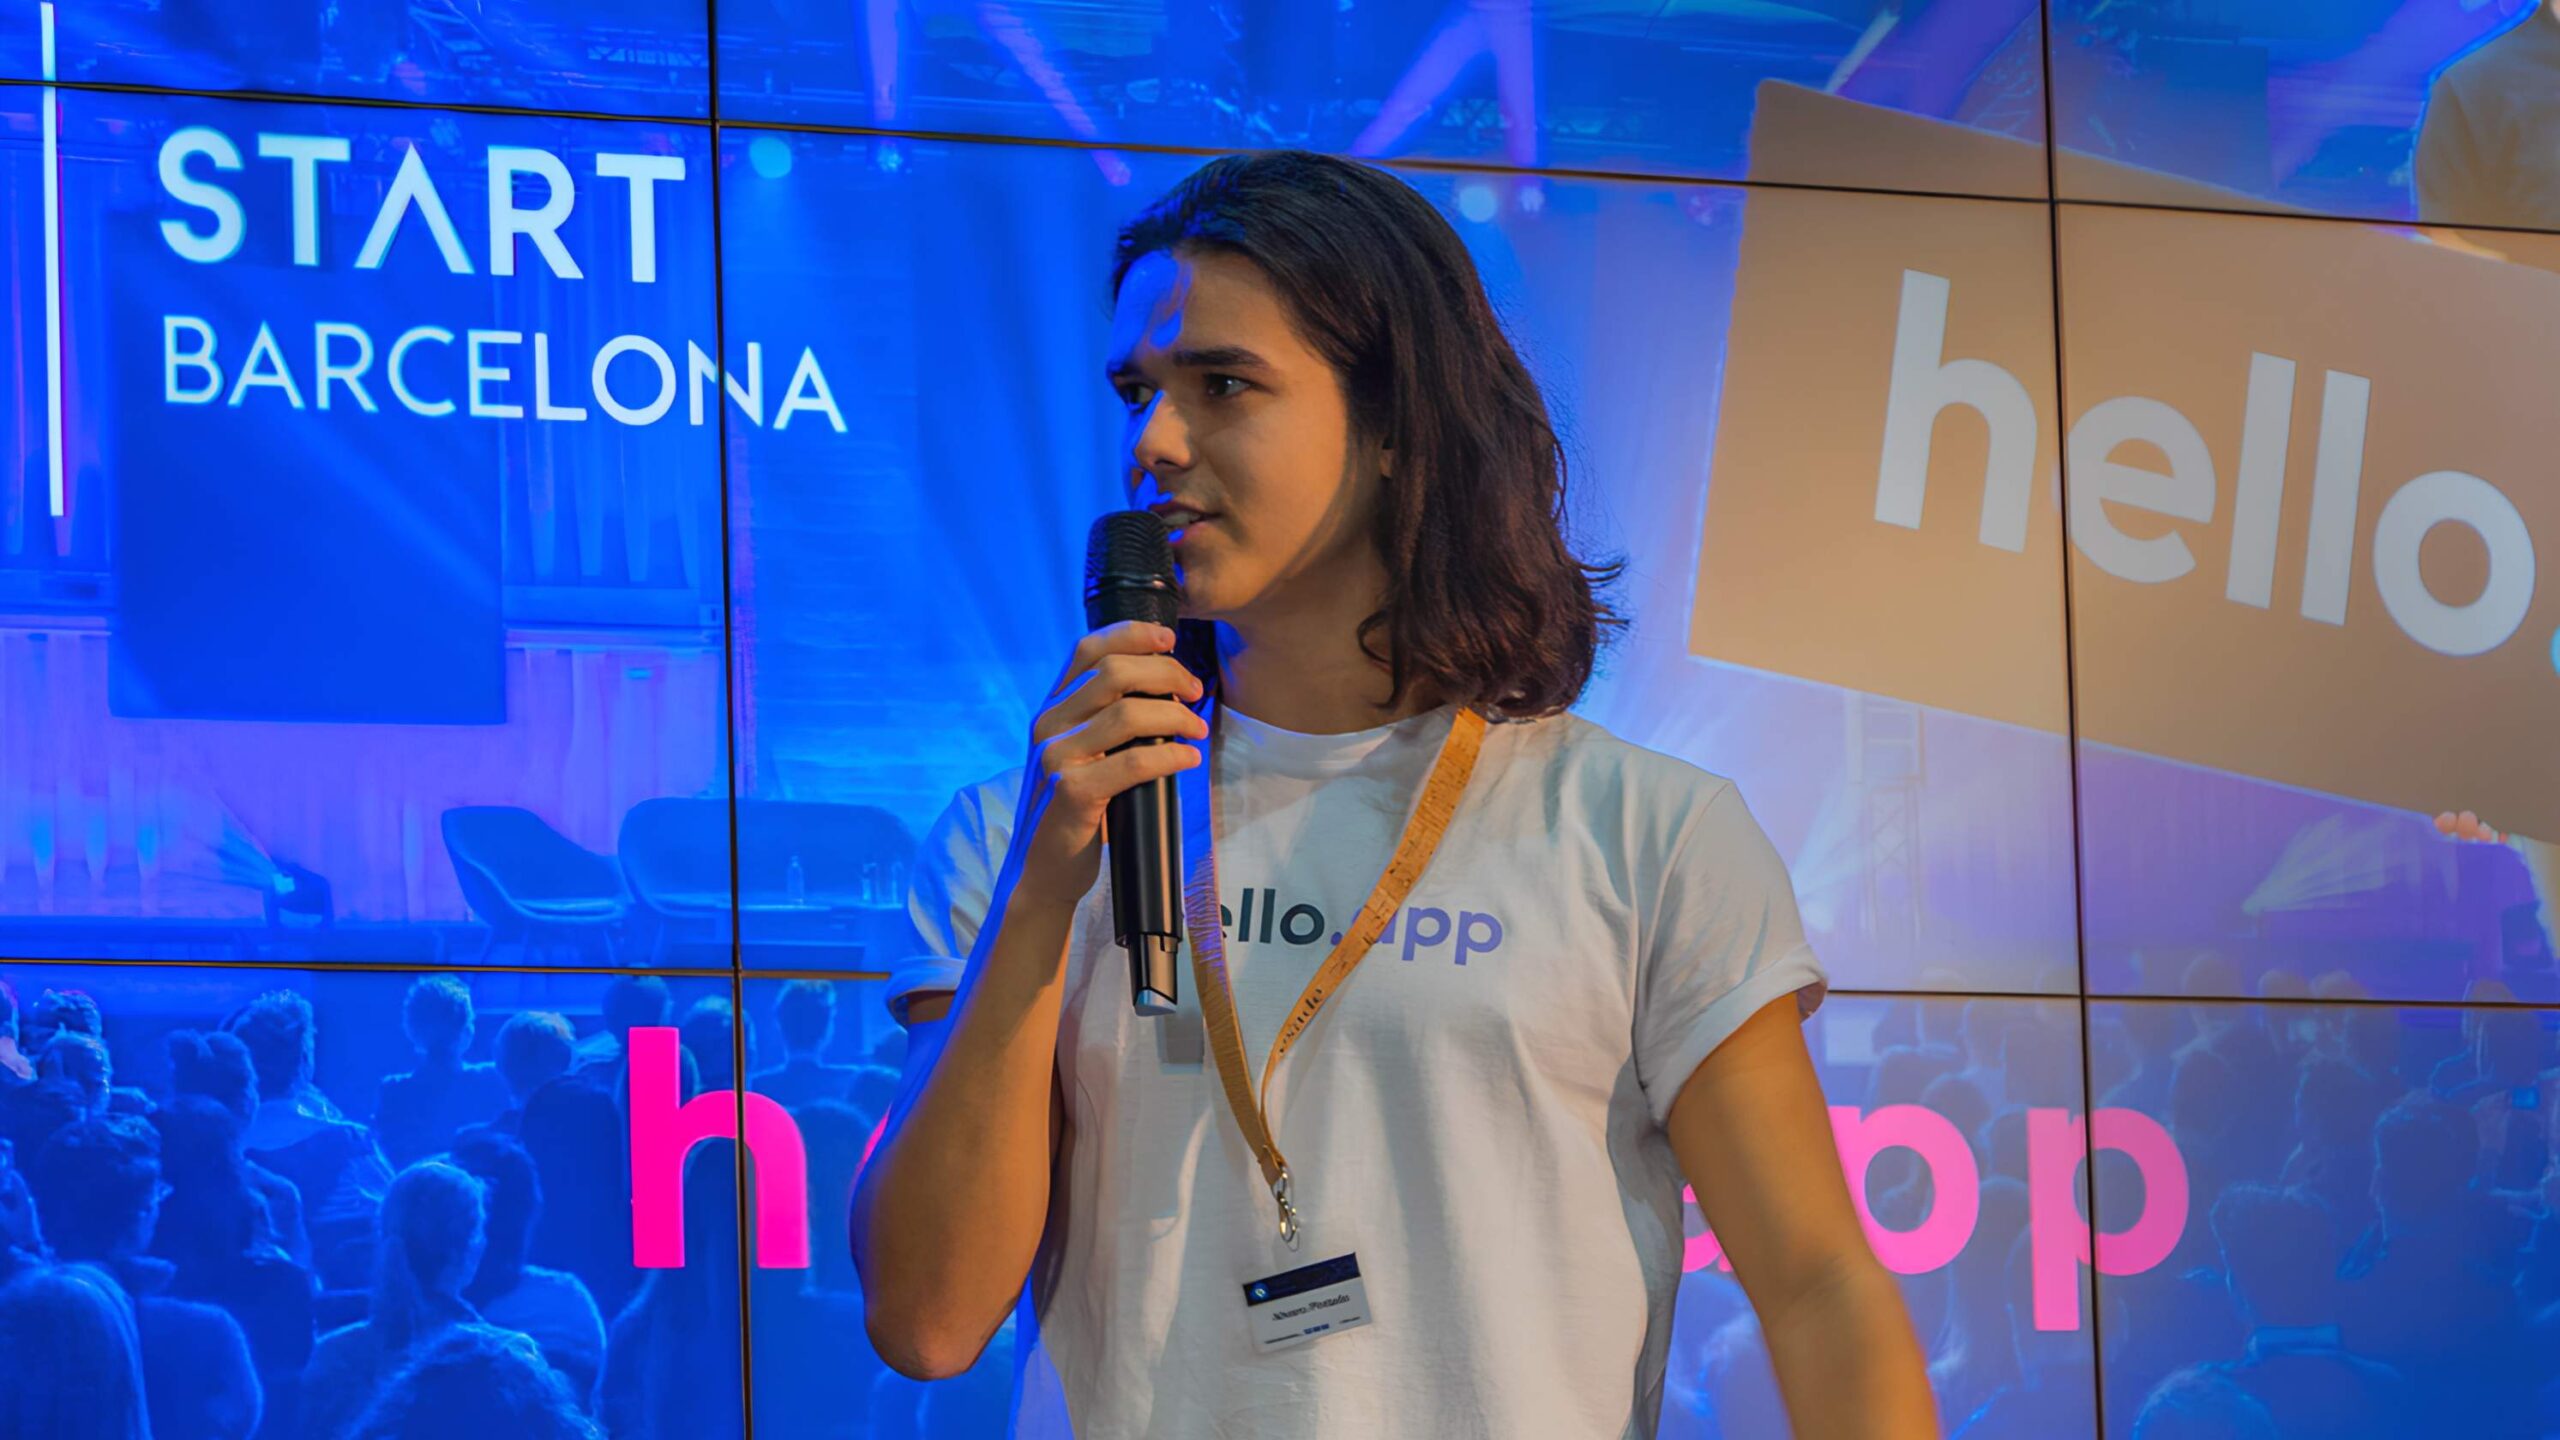 Barcelona's Hello.app Aims To Dethrone Google Cloud Storage With Crowdfunding Push